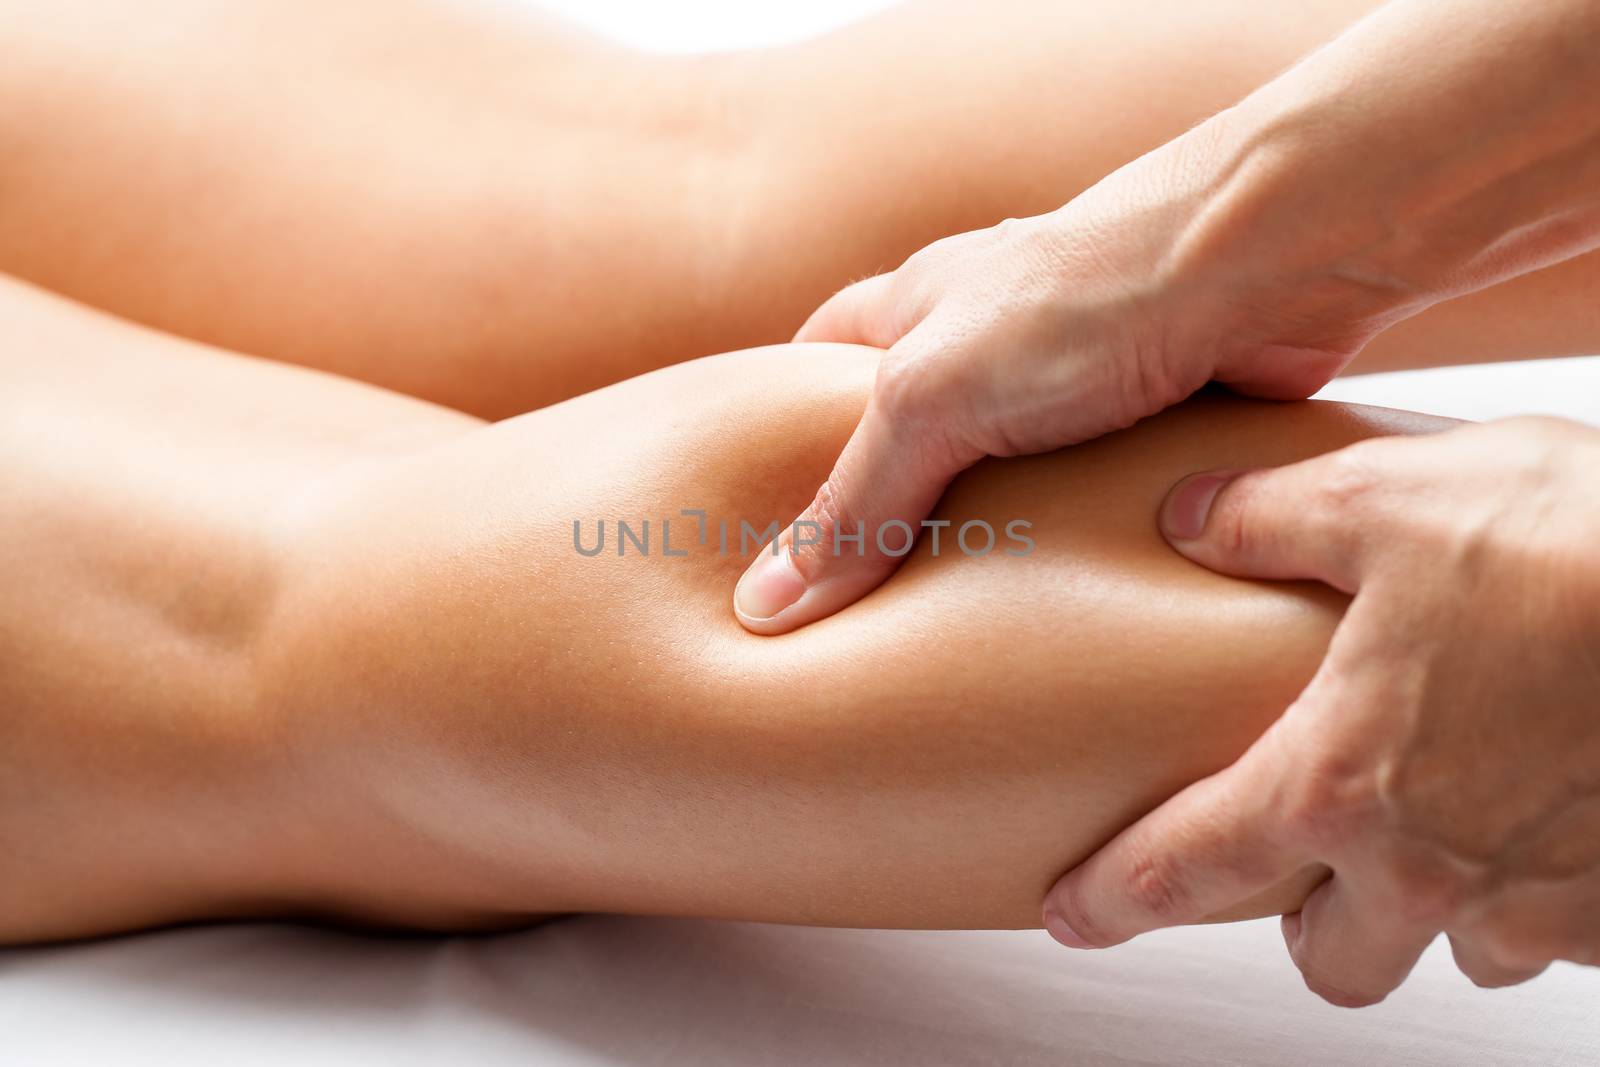 Extreme close up of osteopath applying pressure with thumb on female calf muscle.